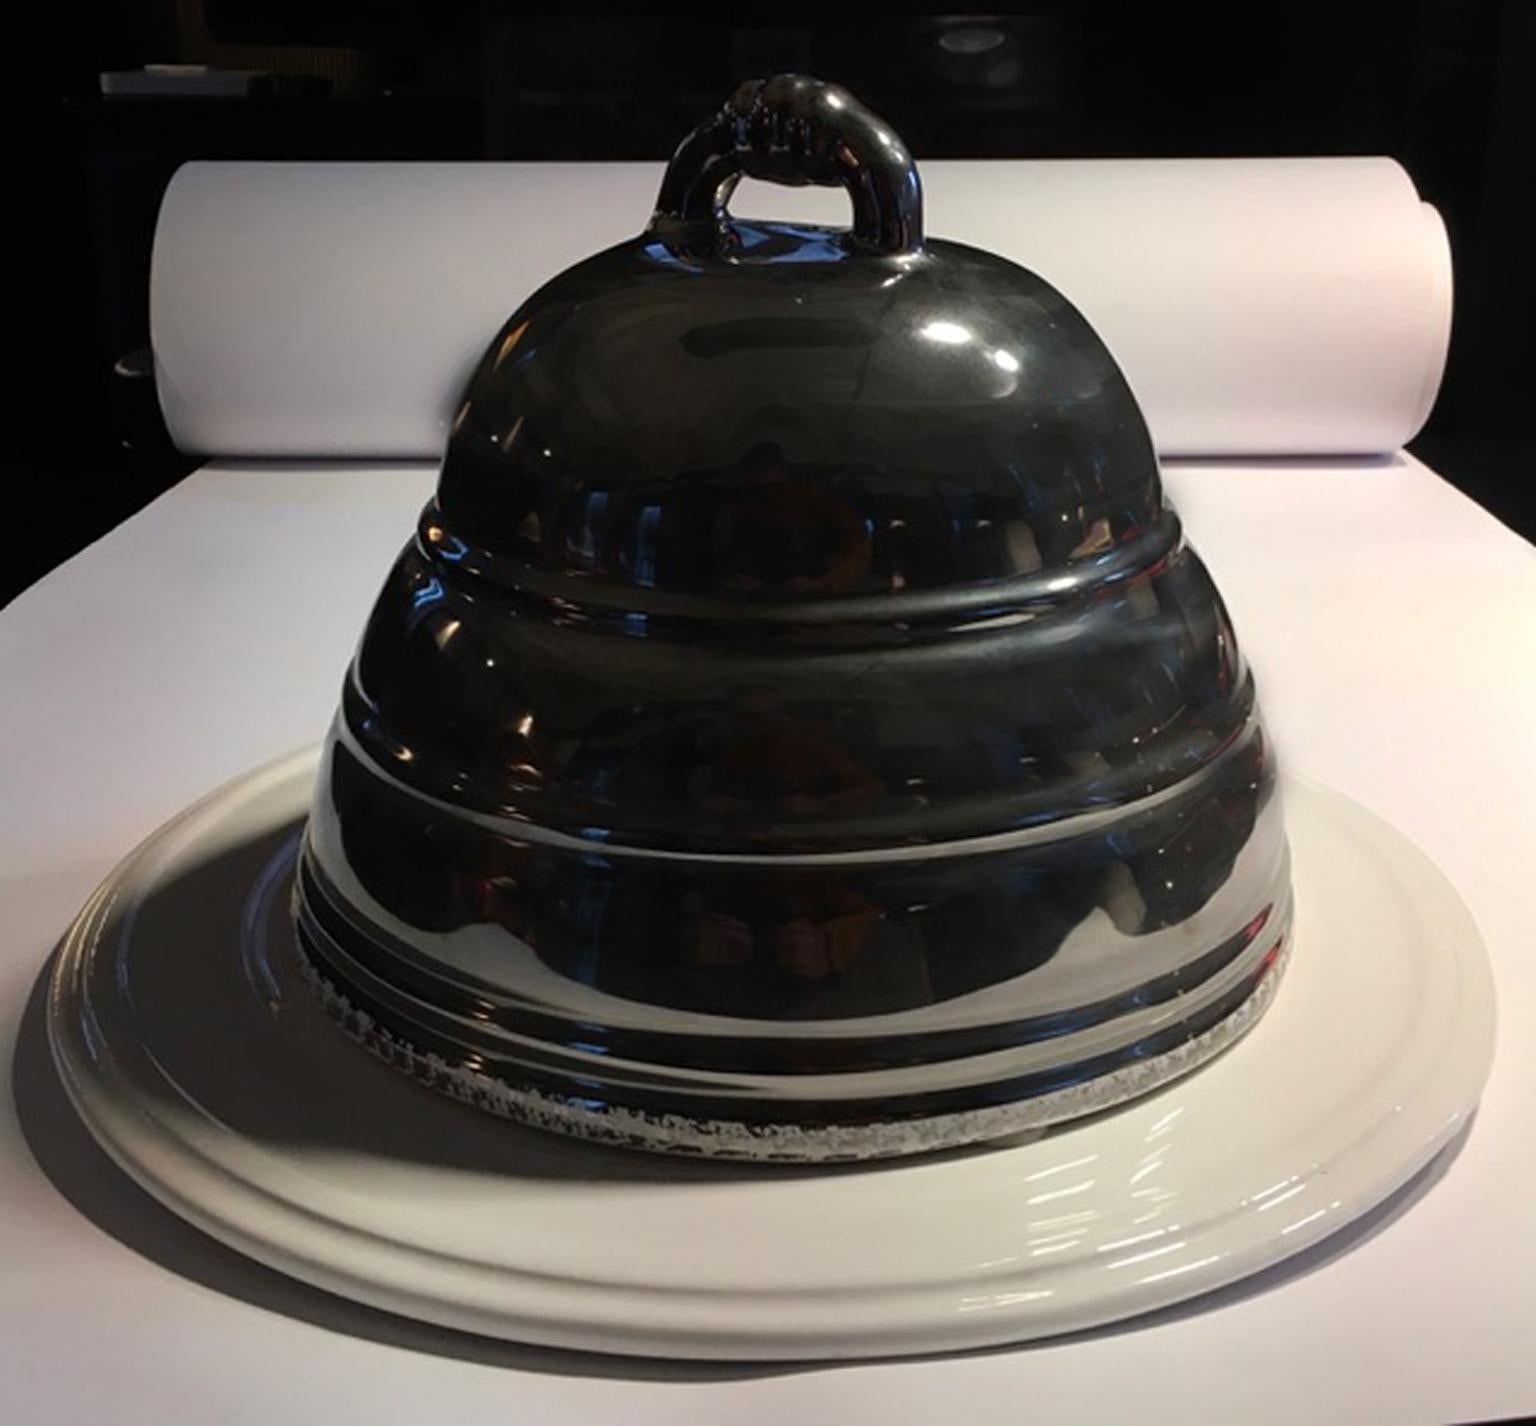 Cake Cloche Dome with Circular Dish in White and Silver Pottery 1